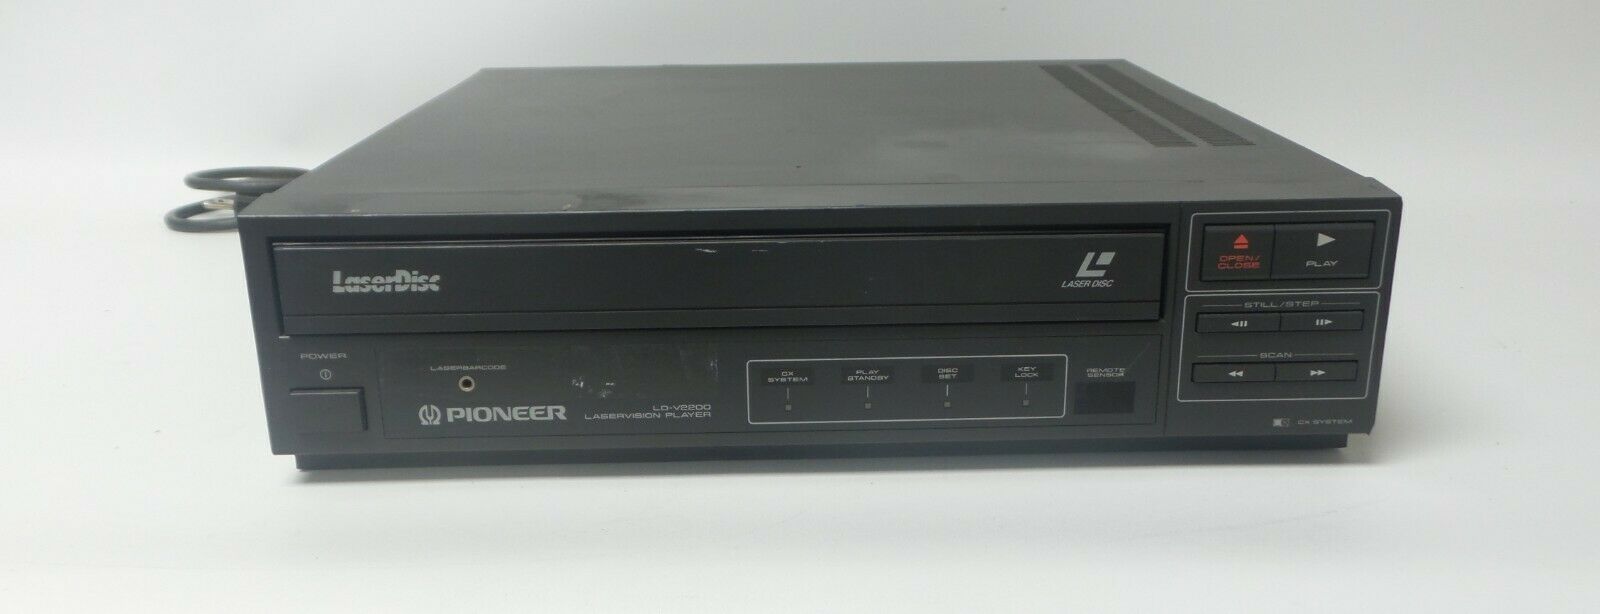 Pioneer Ld-v2200 Laservision Laserdisc Ld Disc Player Tested Working- No Remote